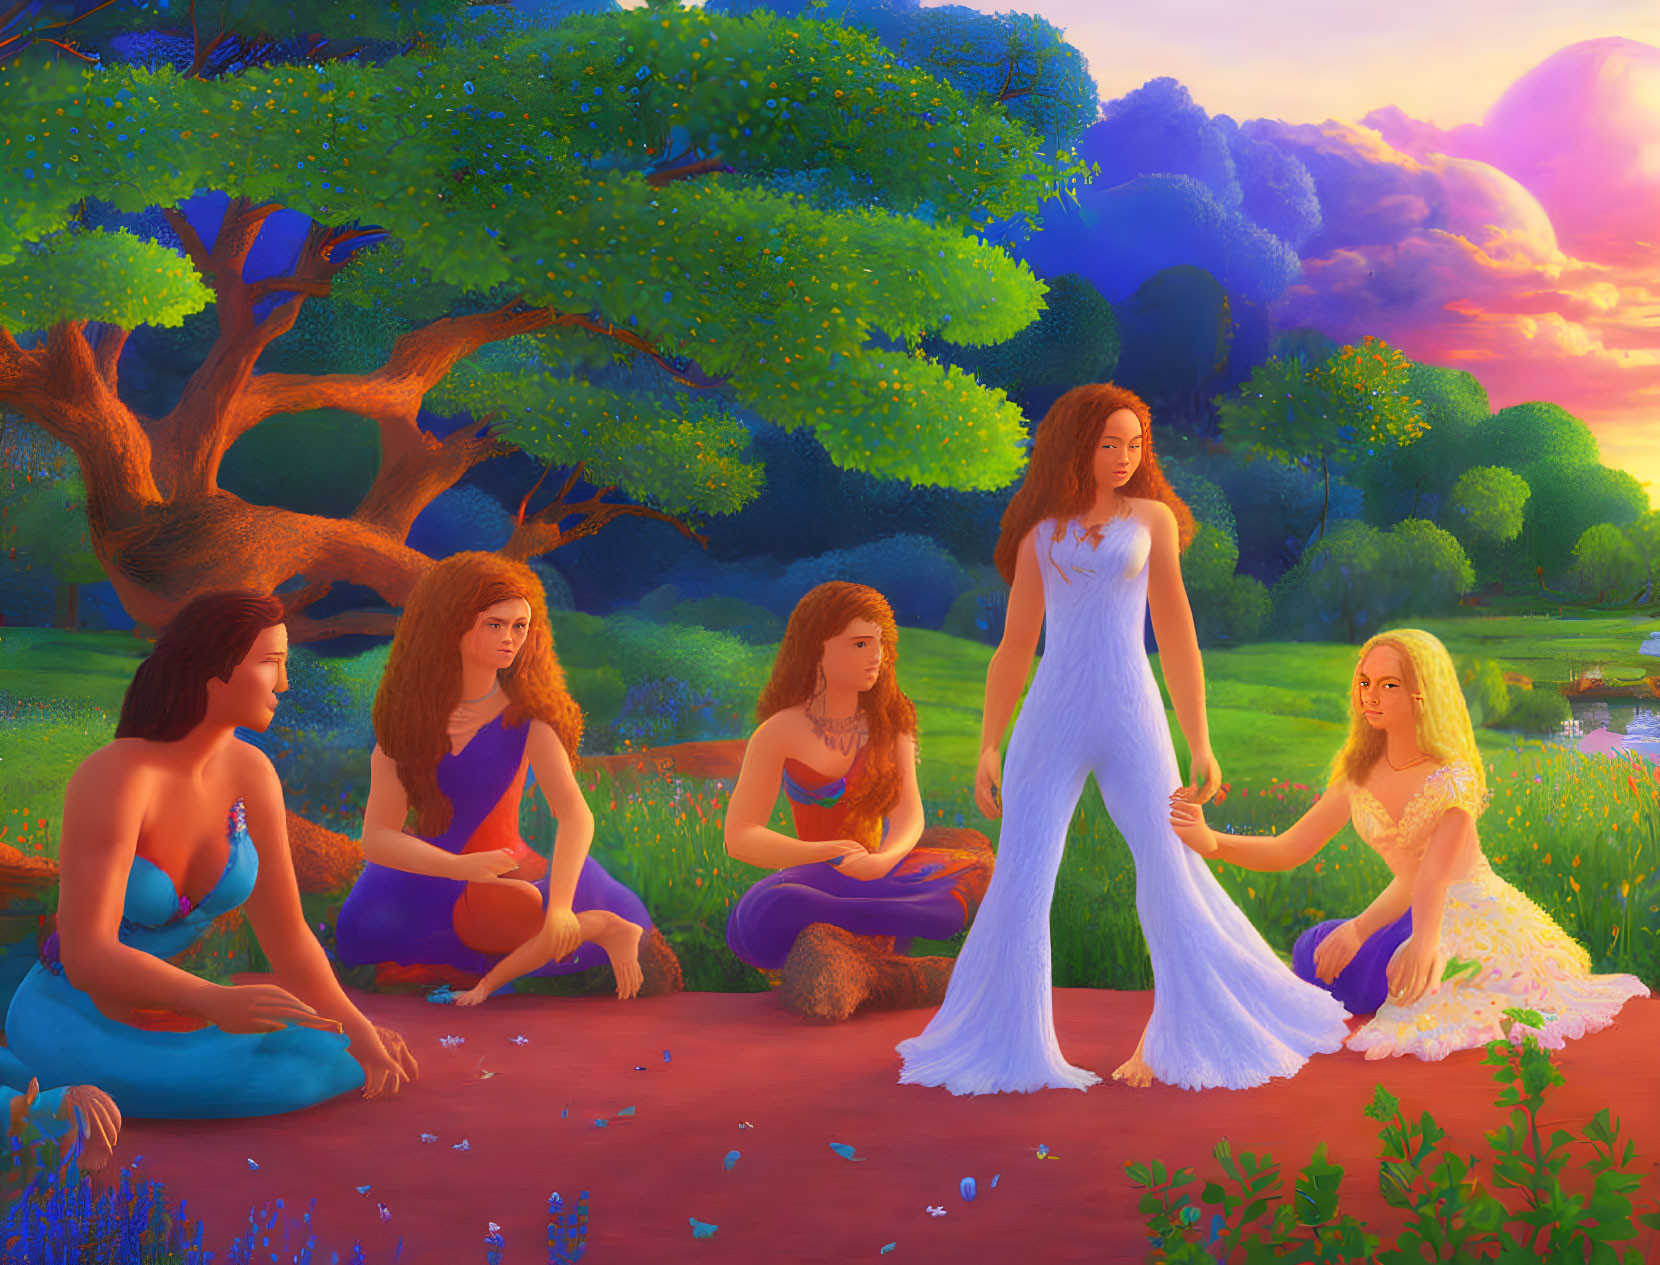 Five ethereal women in flowing dresses in serene forest glade at sunset